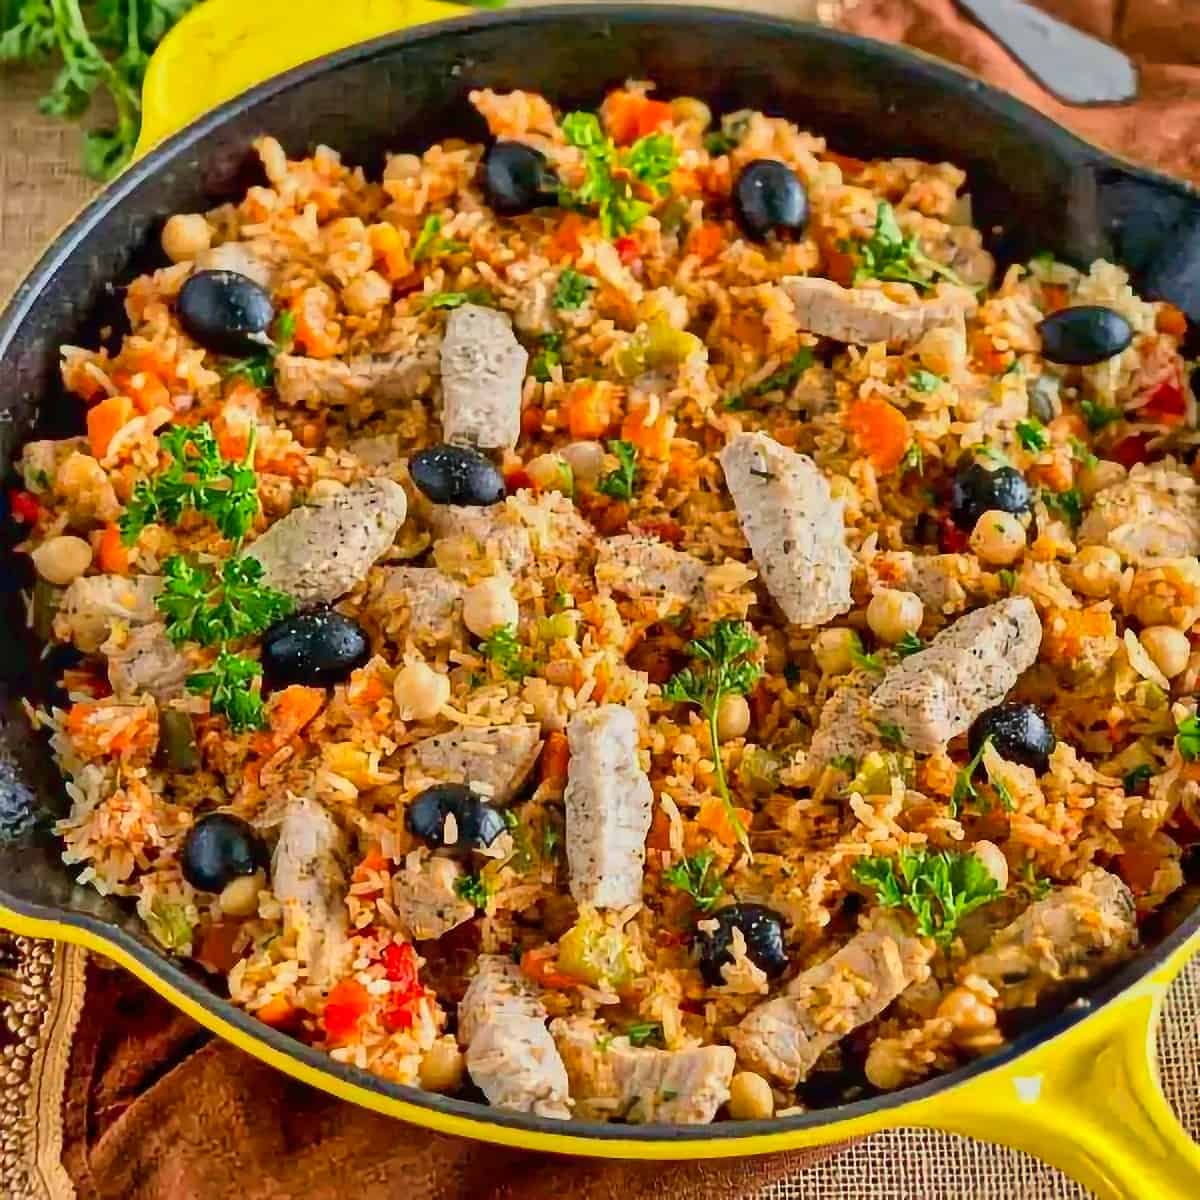 16. Mediterranean Pork and Rice from Delicious Meets Healthy